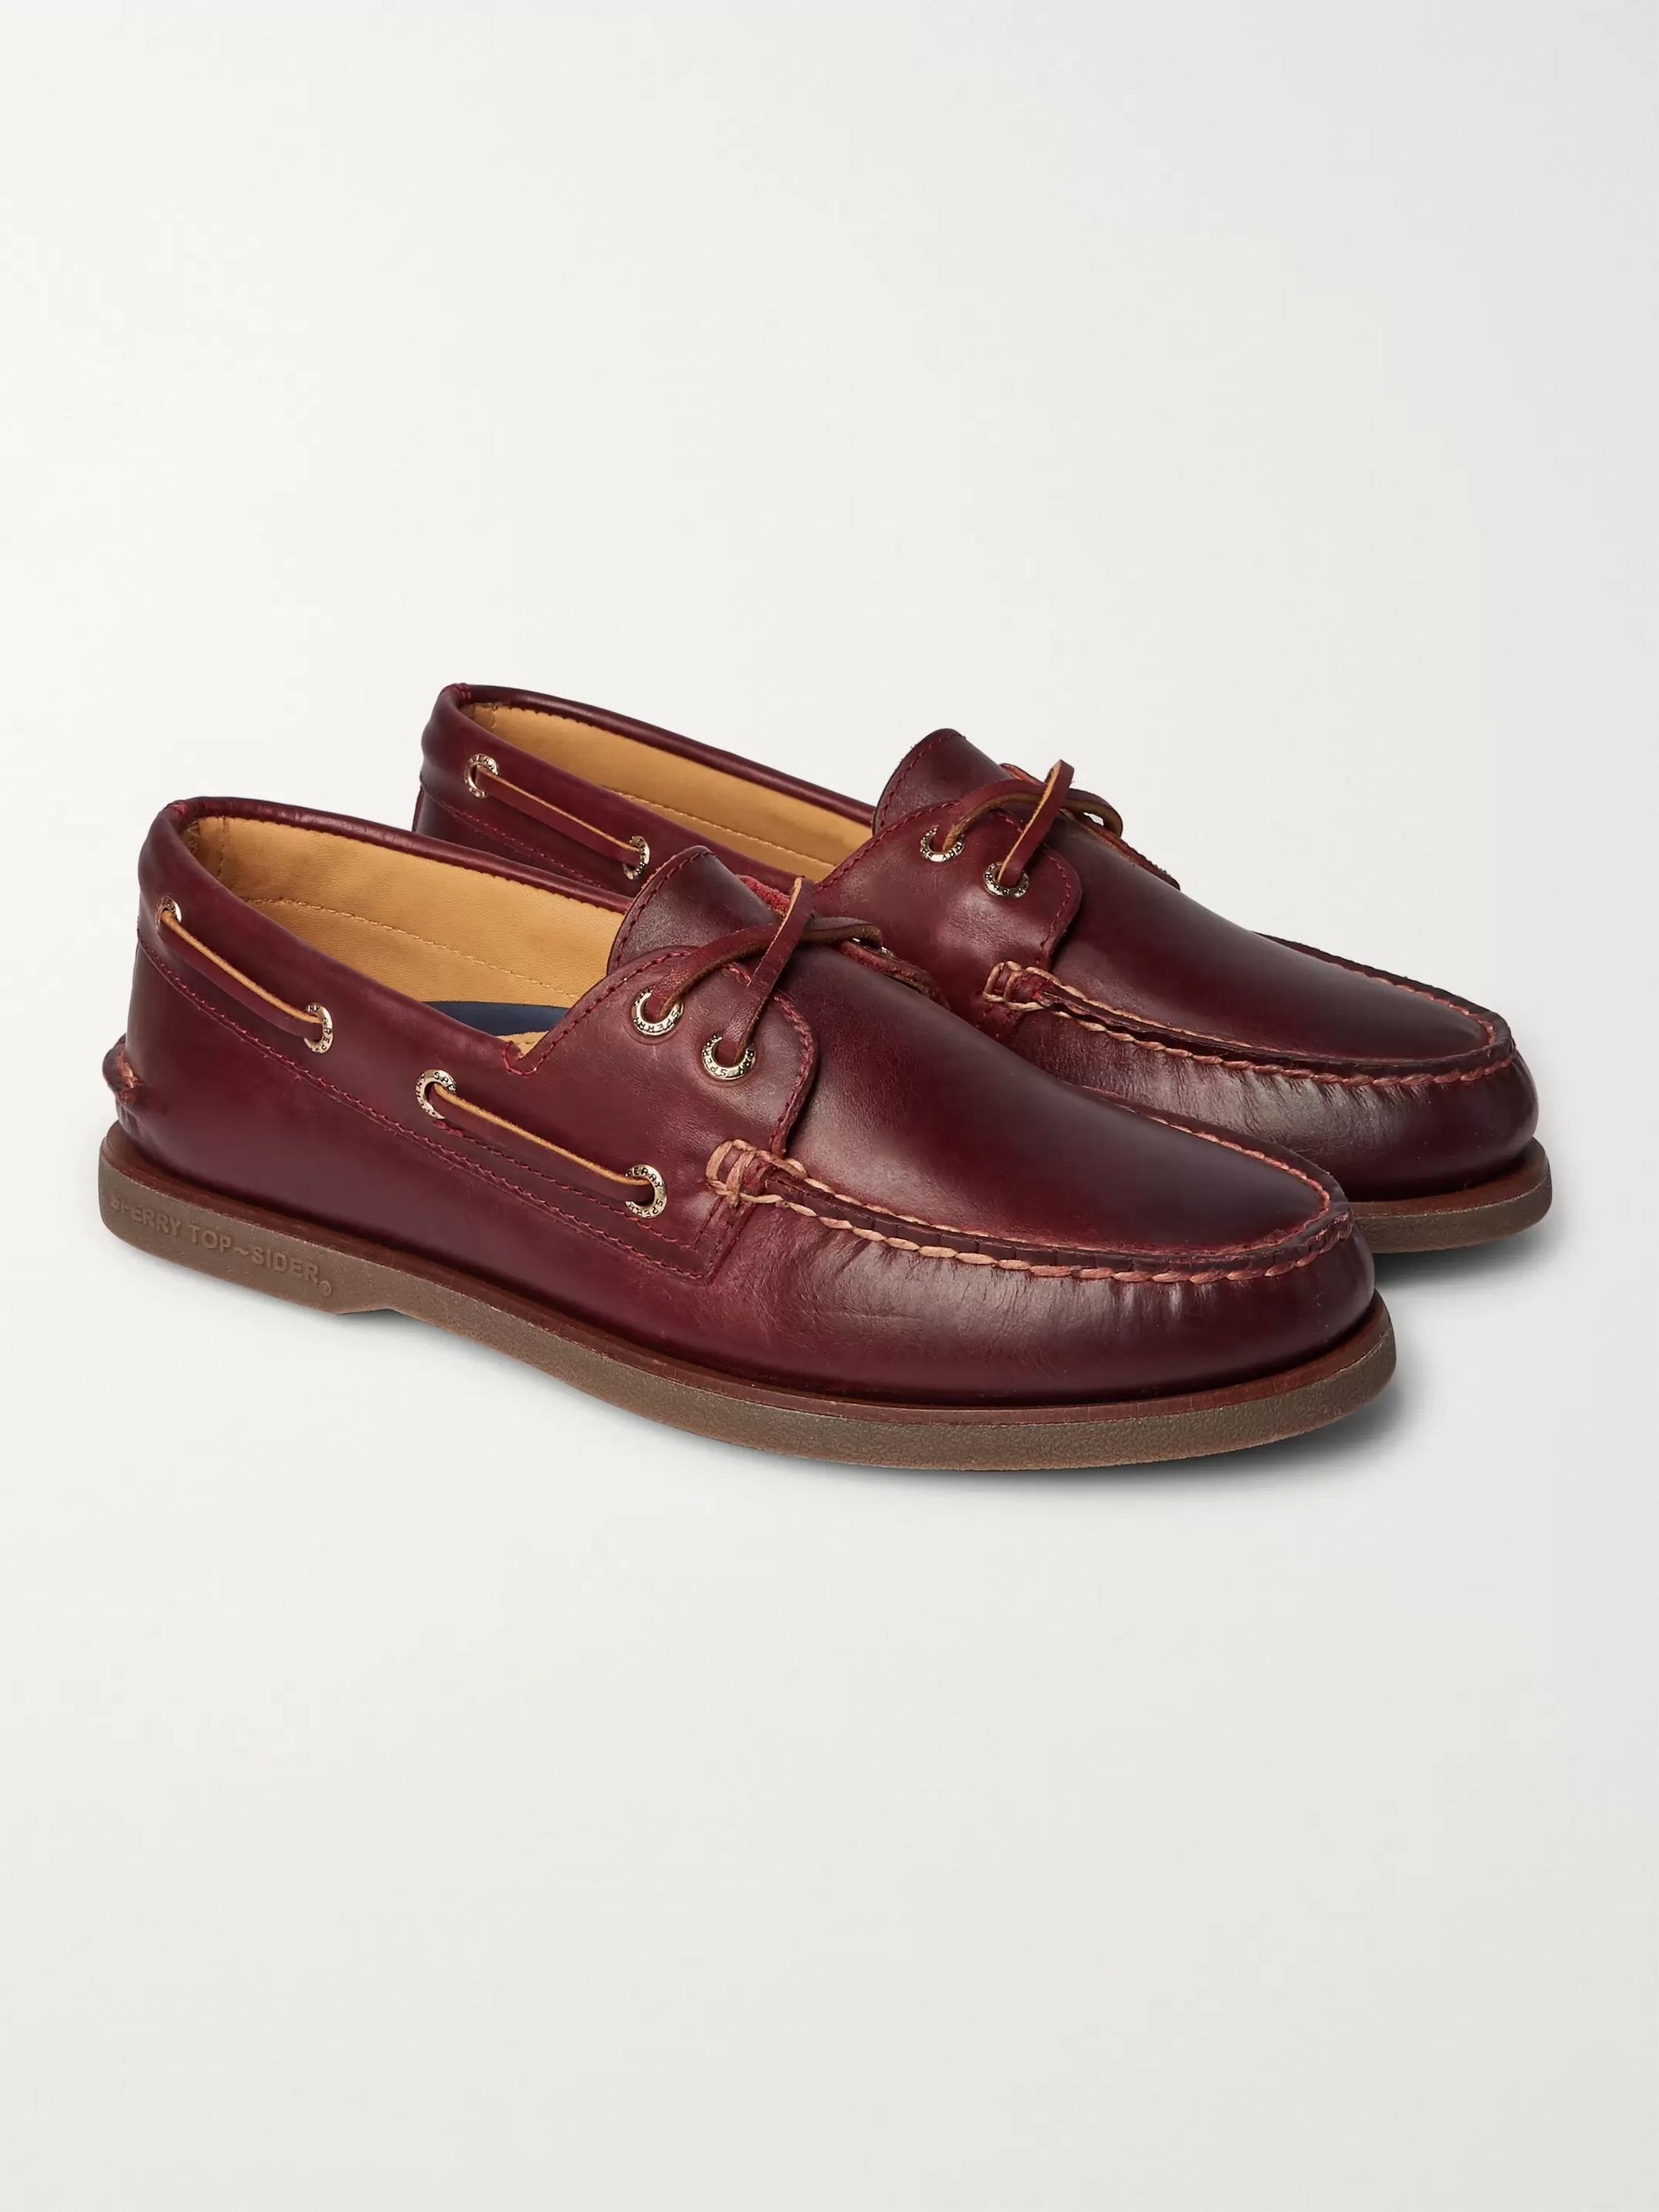 sperry gold toe boat shoes